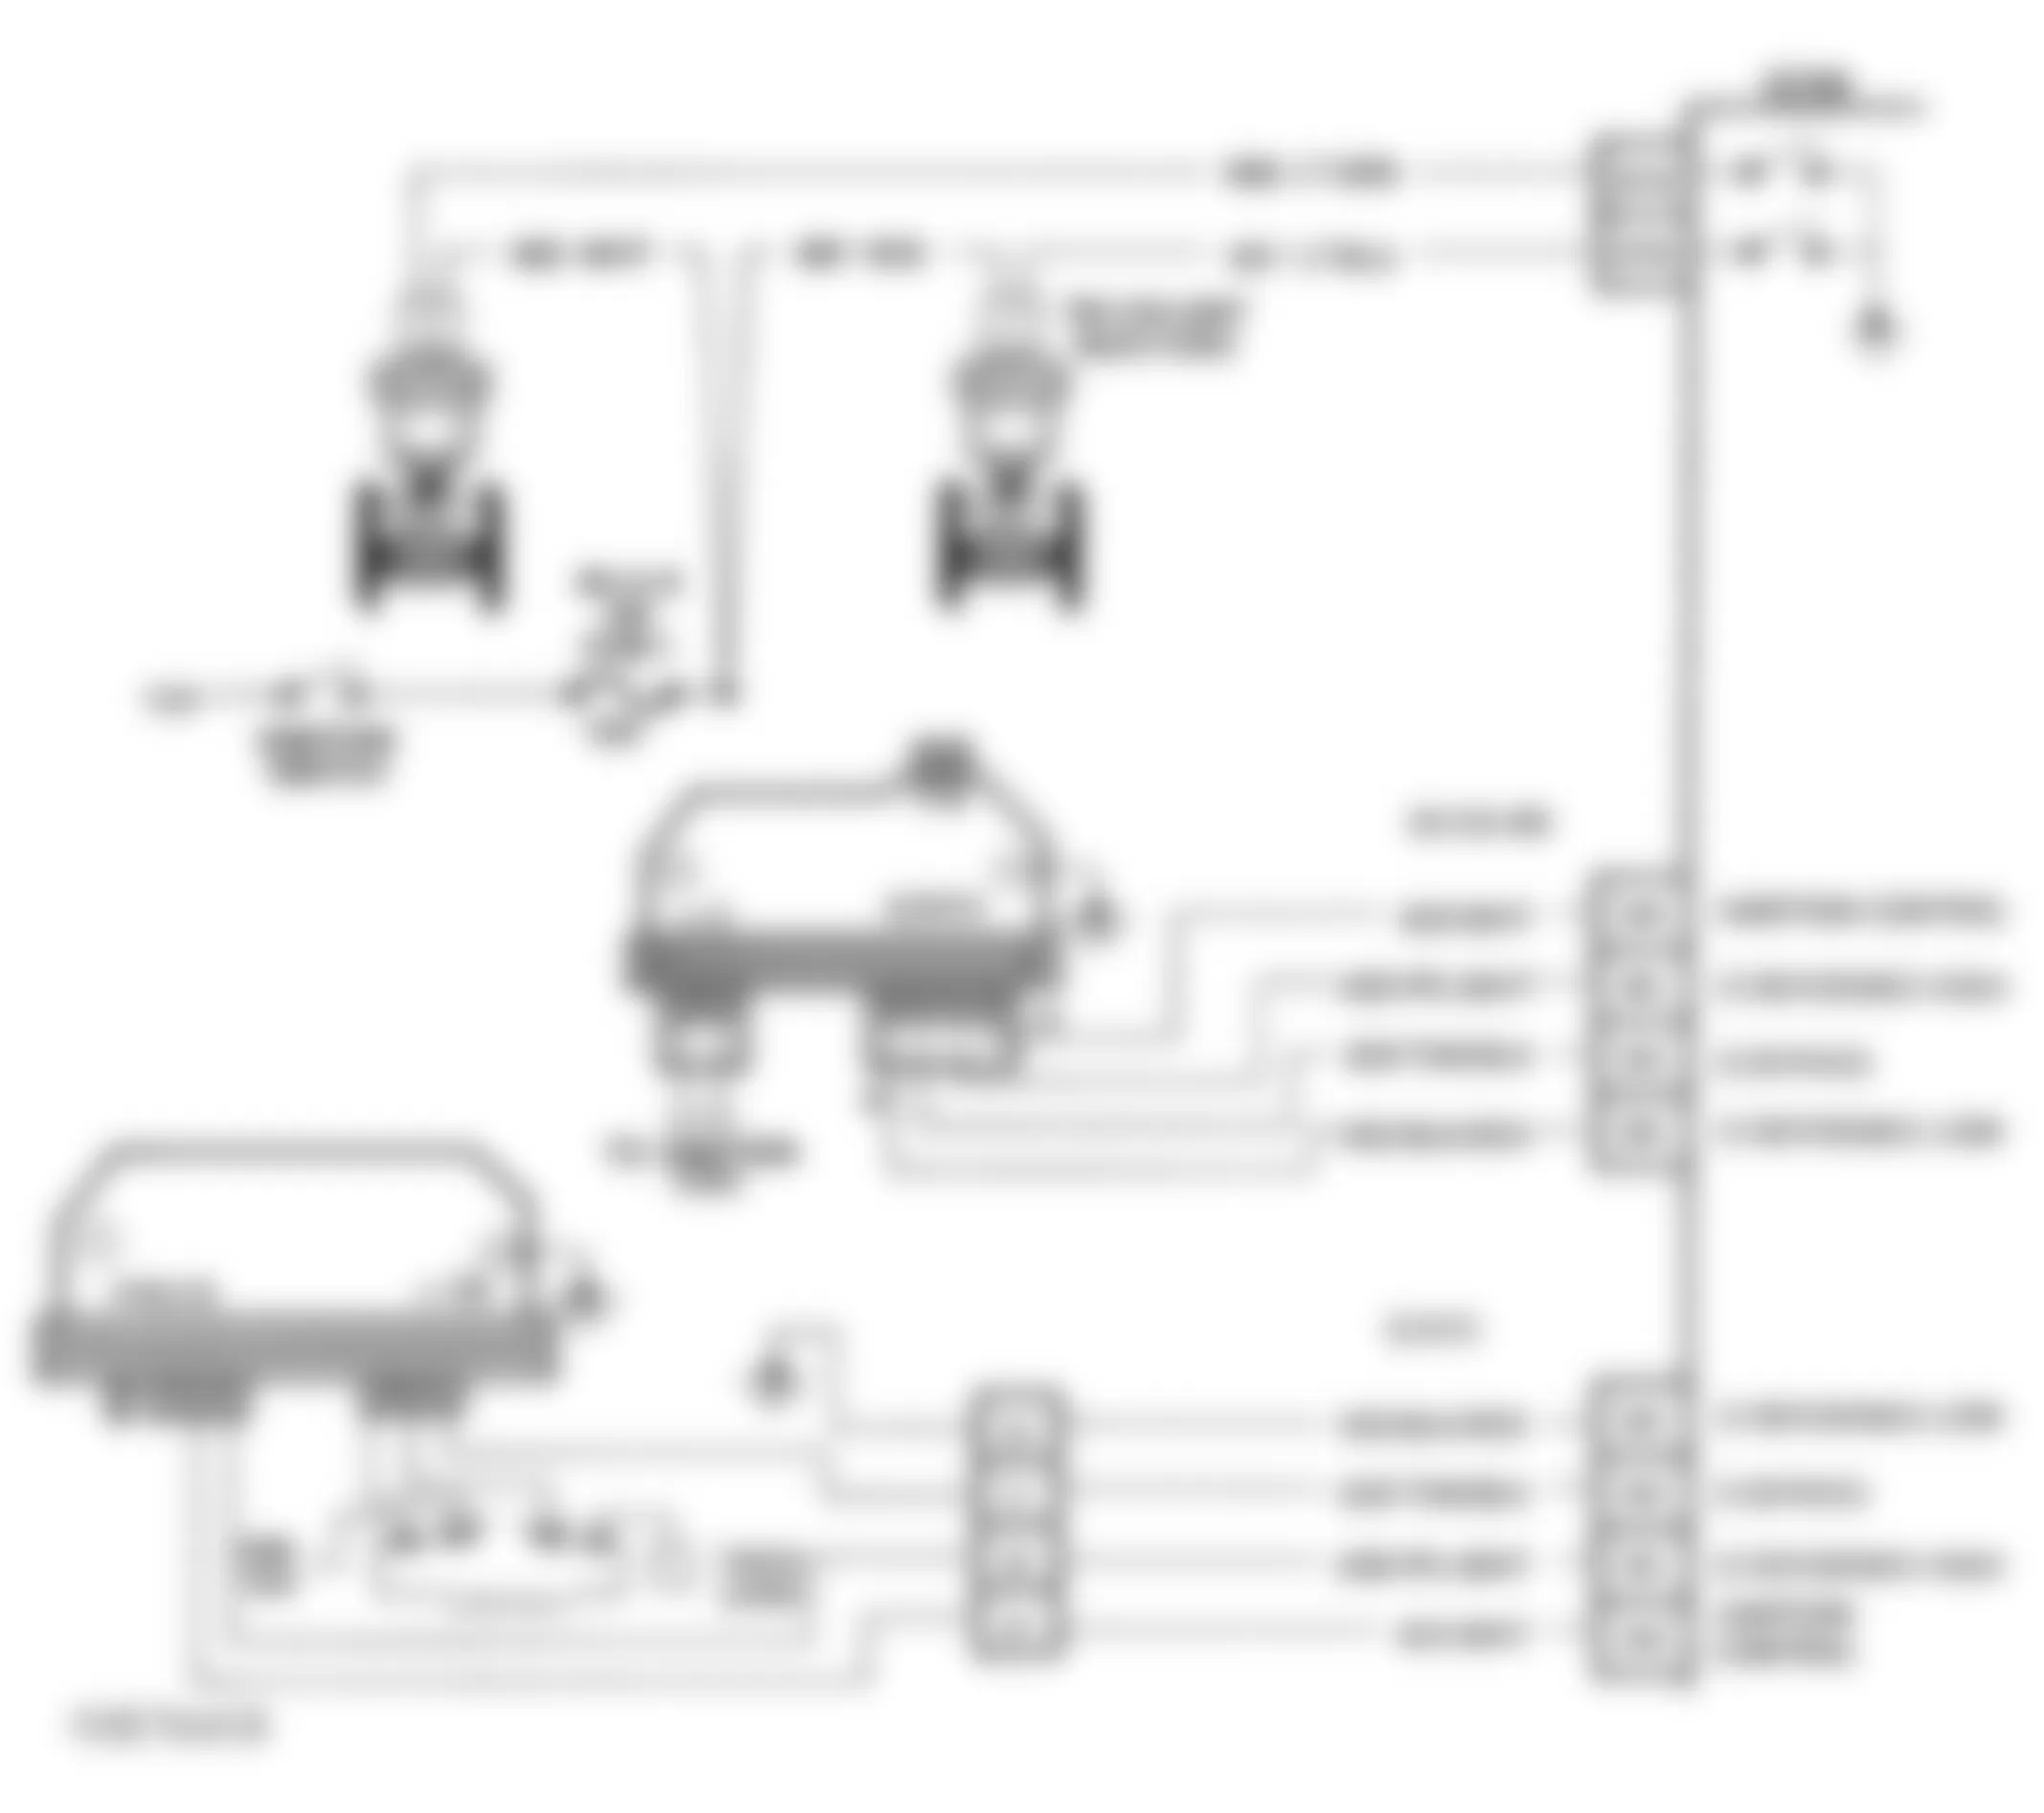 Chevrolet S10 Pickup 1993 - Component Locations -  CODE 42, Schematic, Electronic Spark Timing (2.8L)